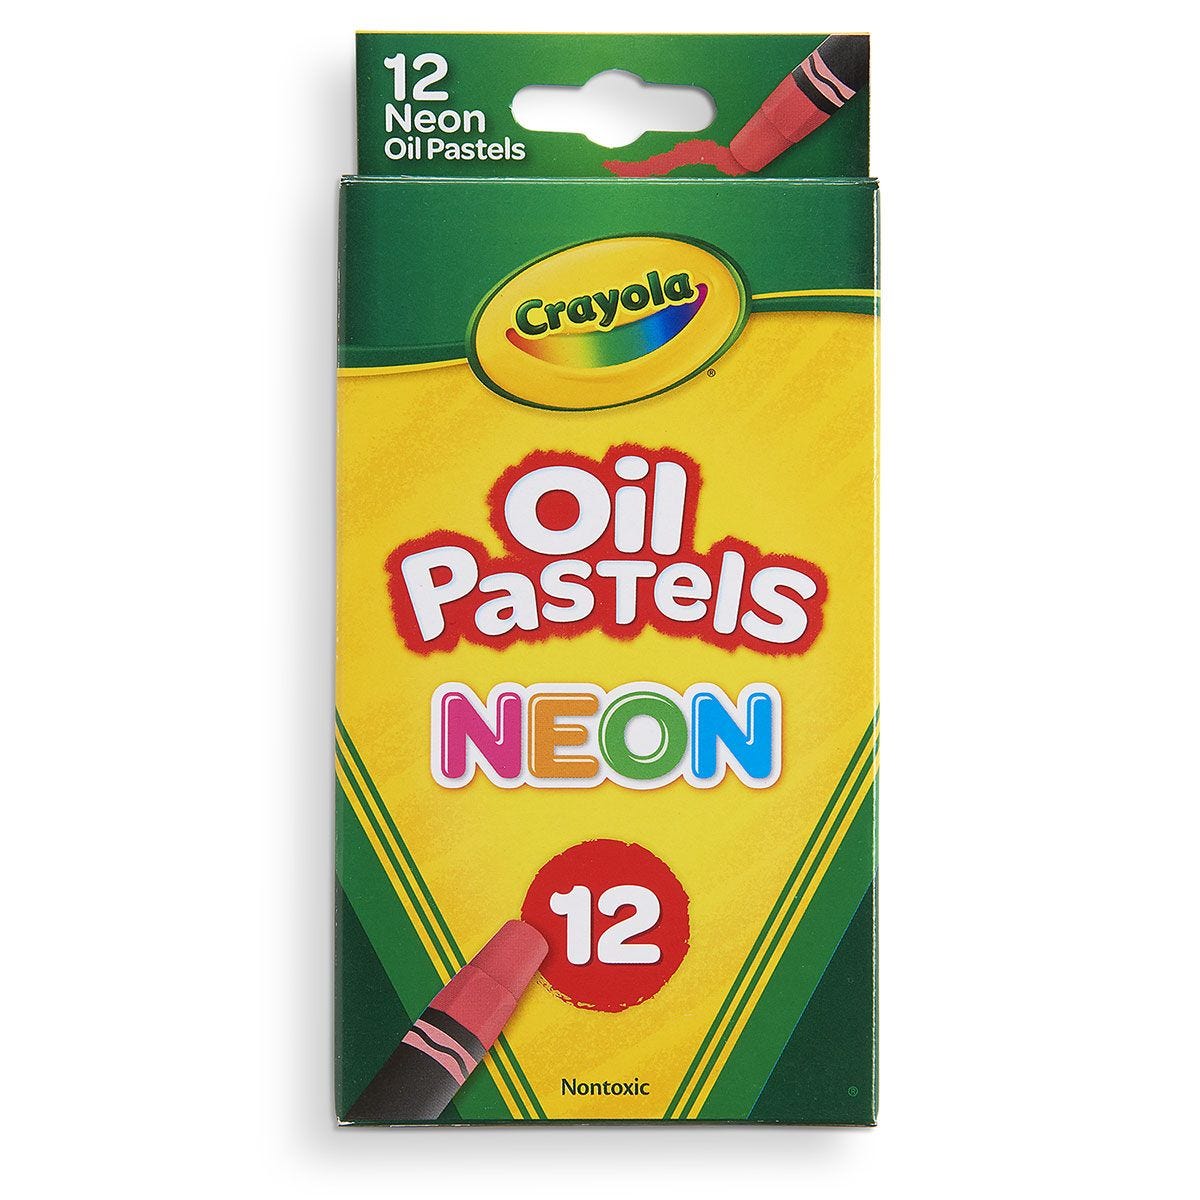 Crayola Water Soluble Oil Pastels Set of 12